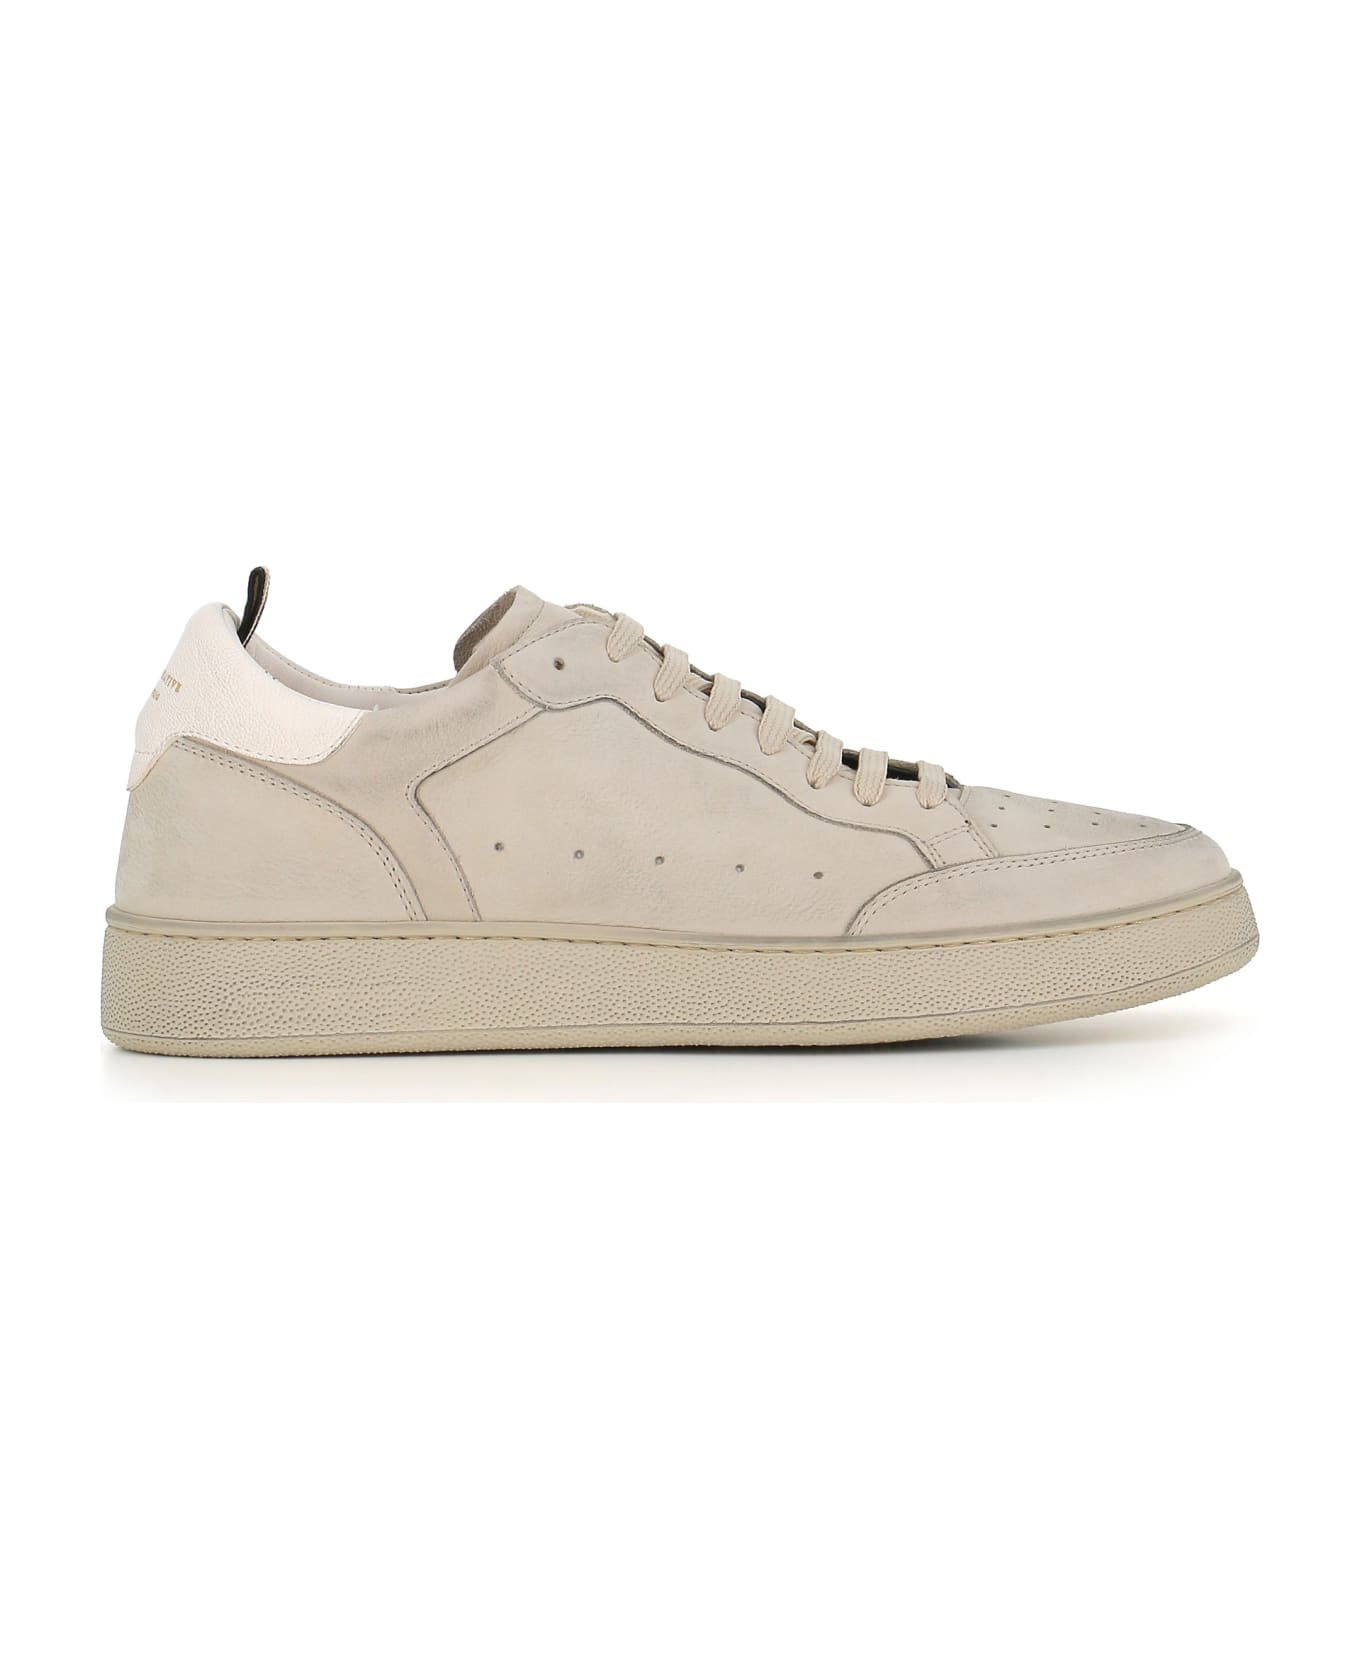 Officine Creative Sneaker The Answer/005 - Light grey